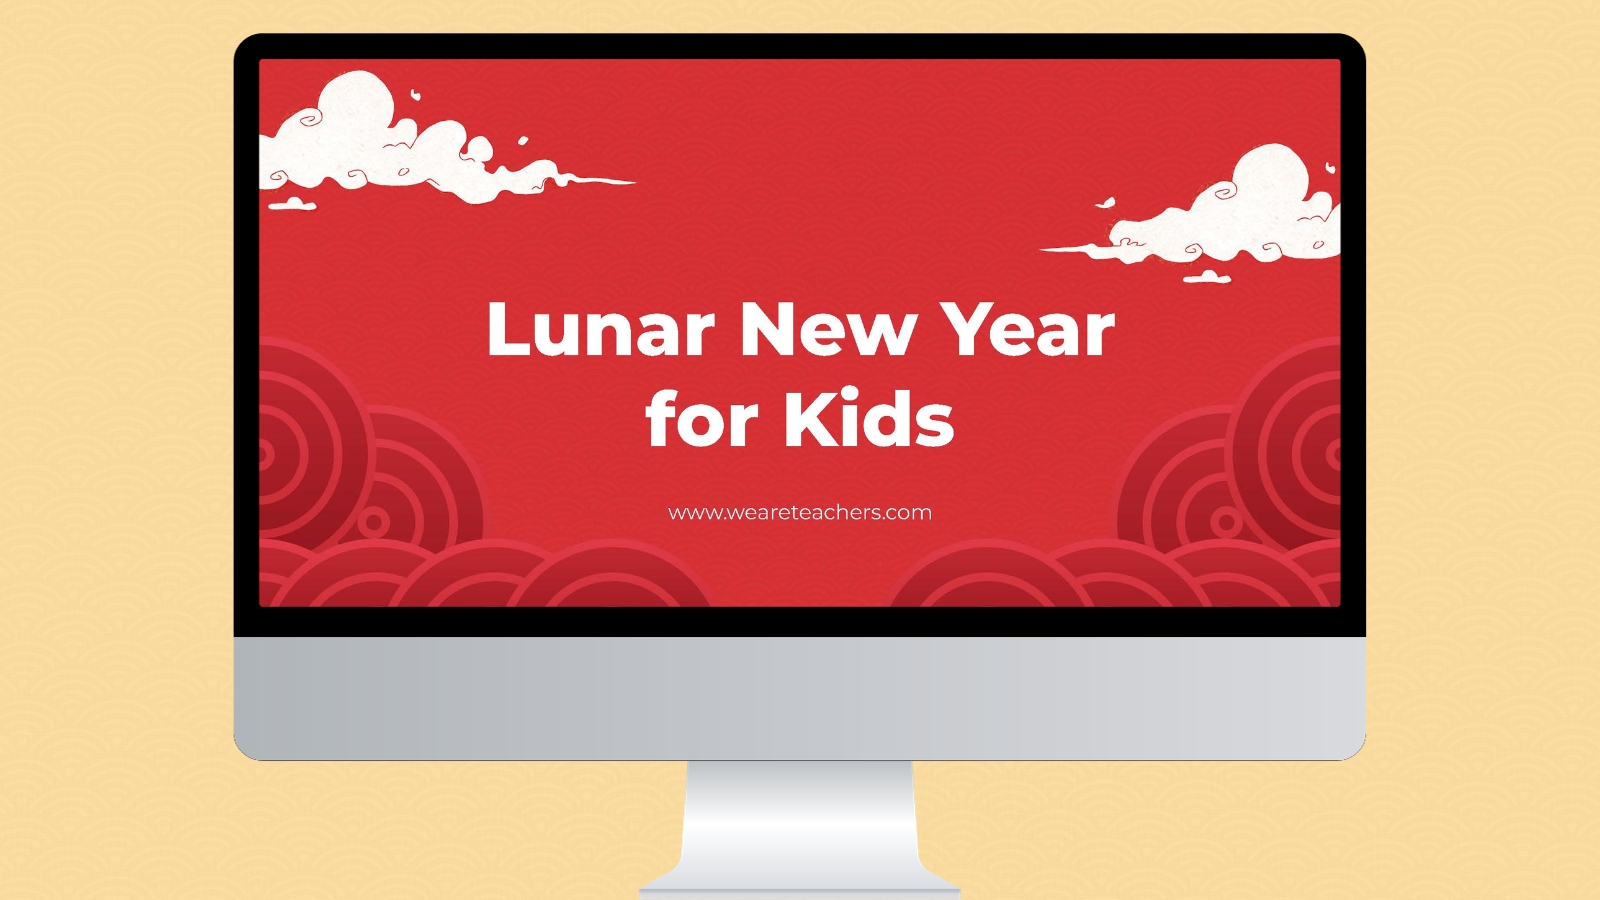 Computer screen with Lunar New Year for Kids slide on it.